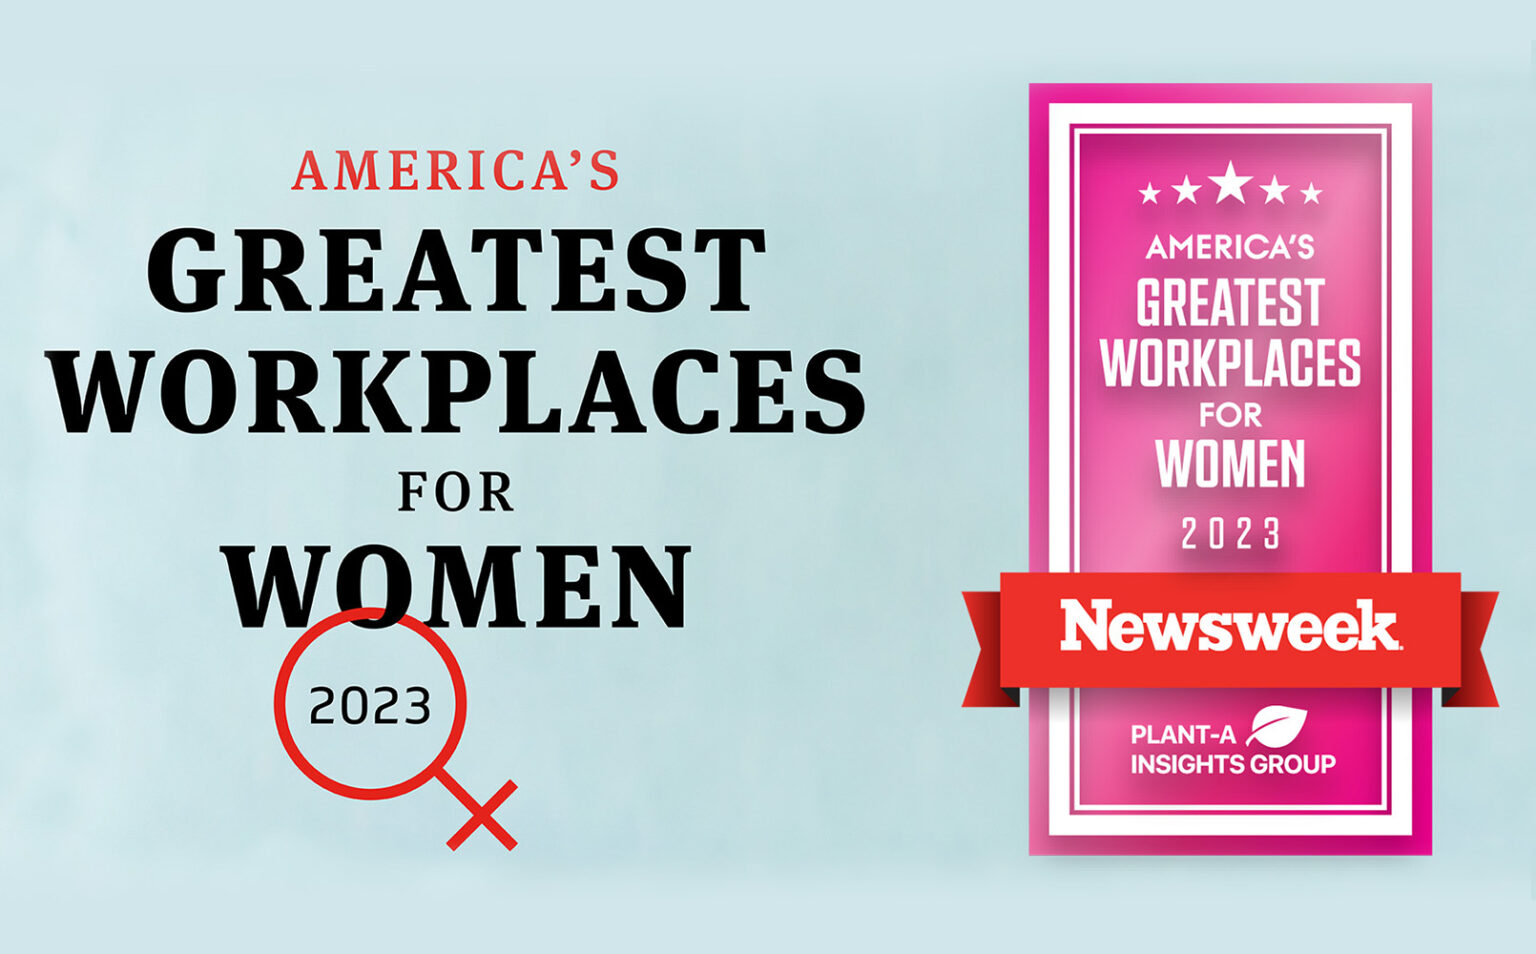 Americas Greatest Workplaces for Women 2023